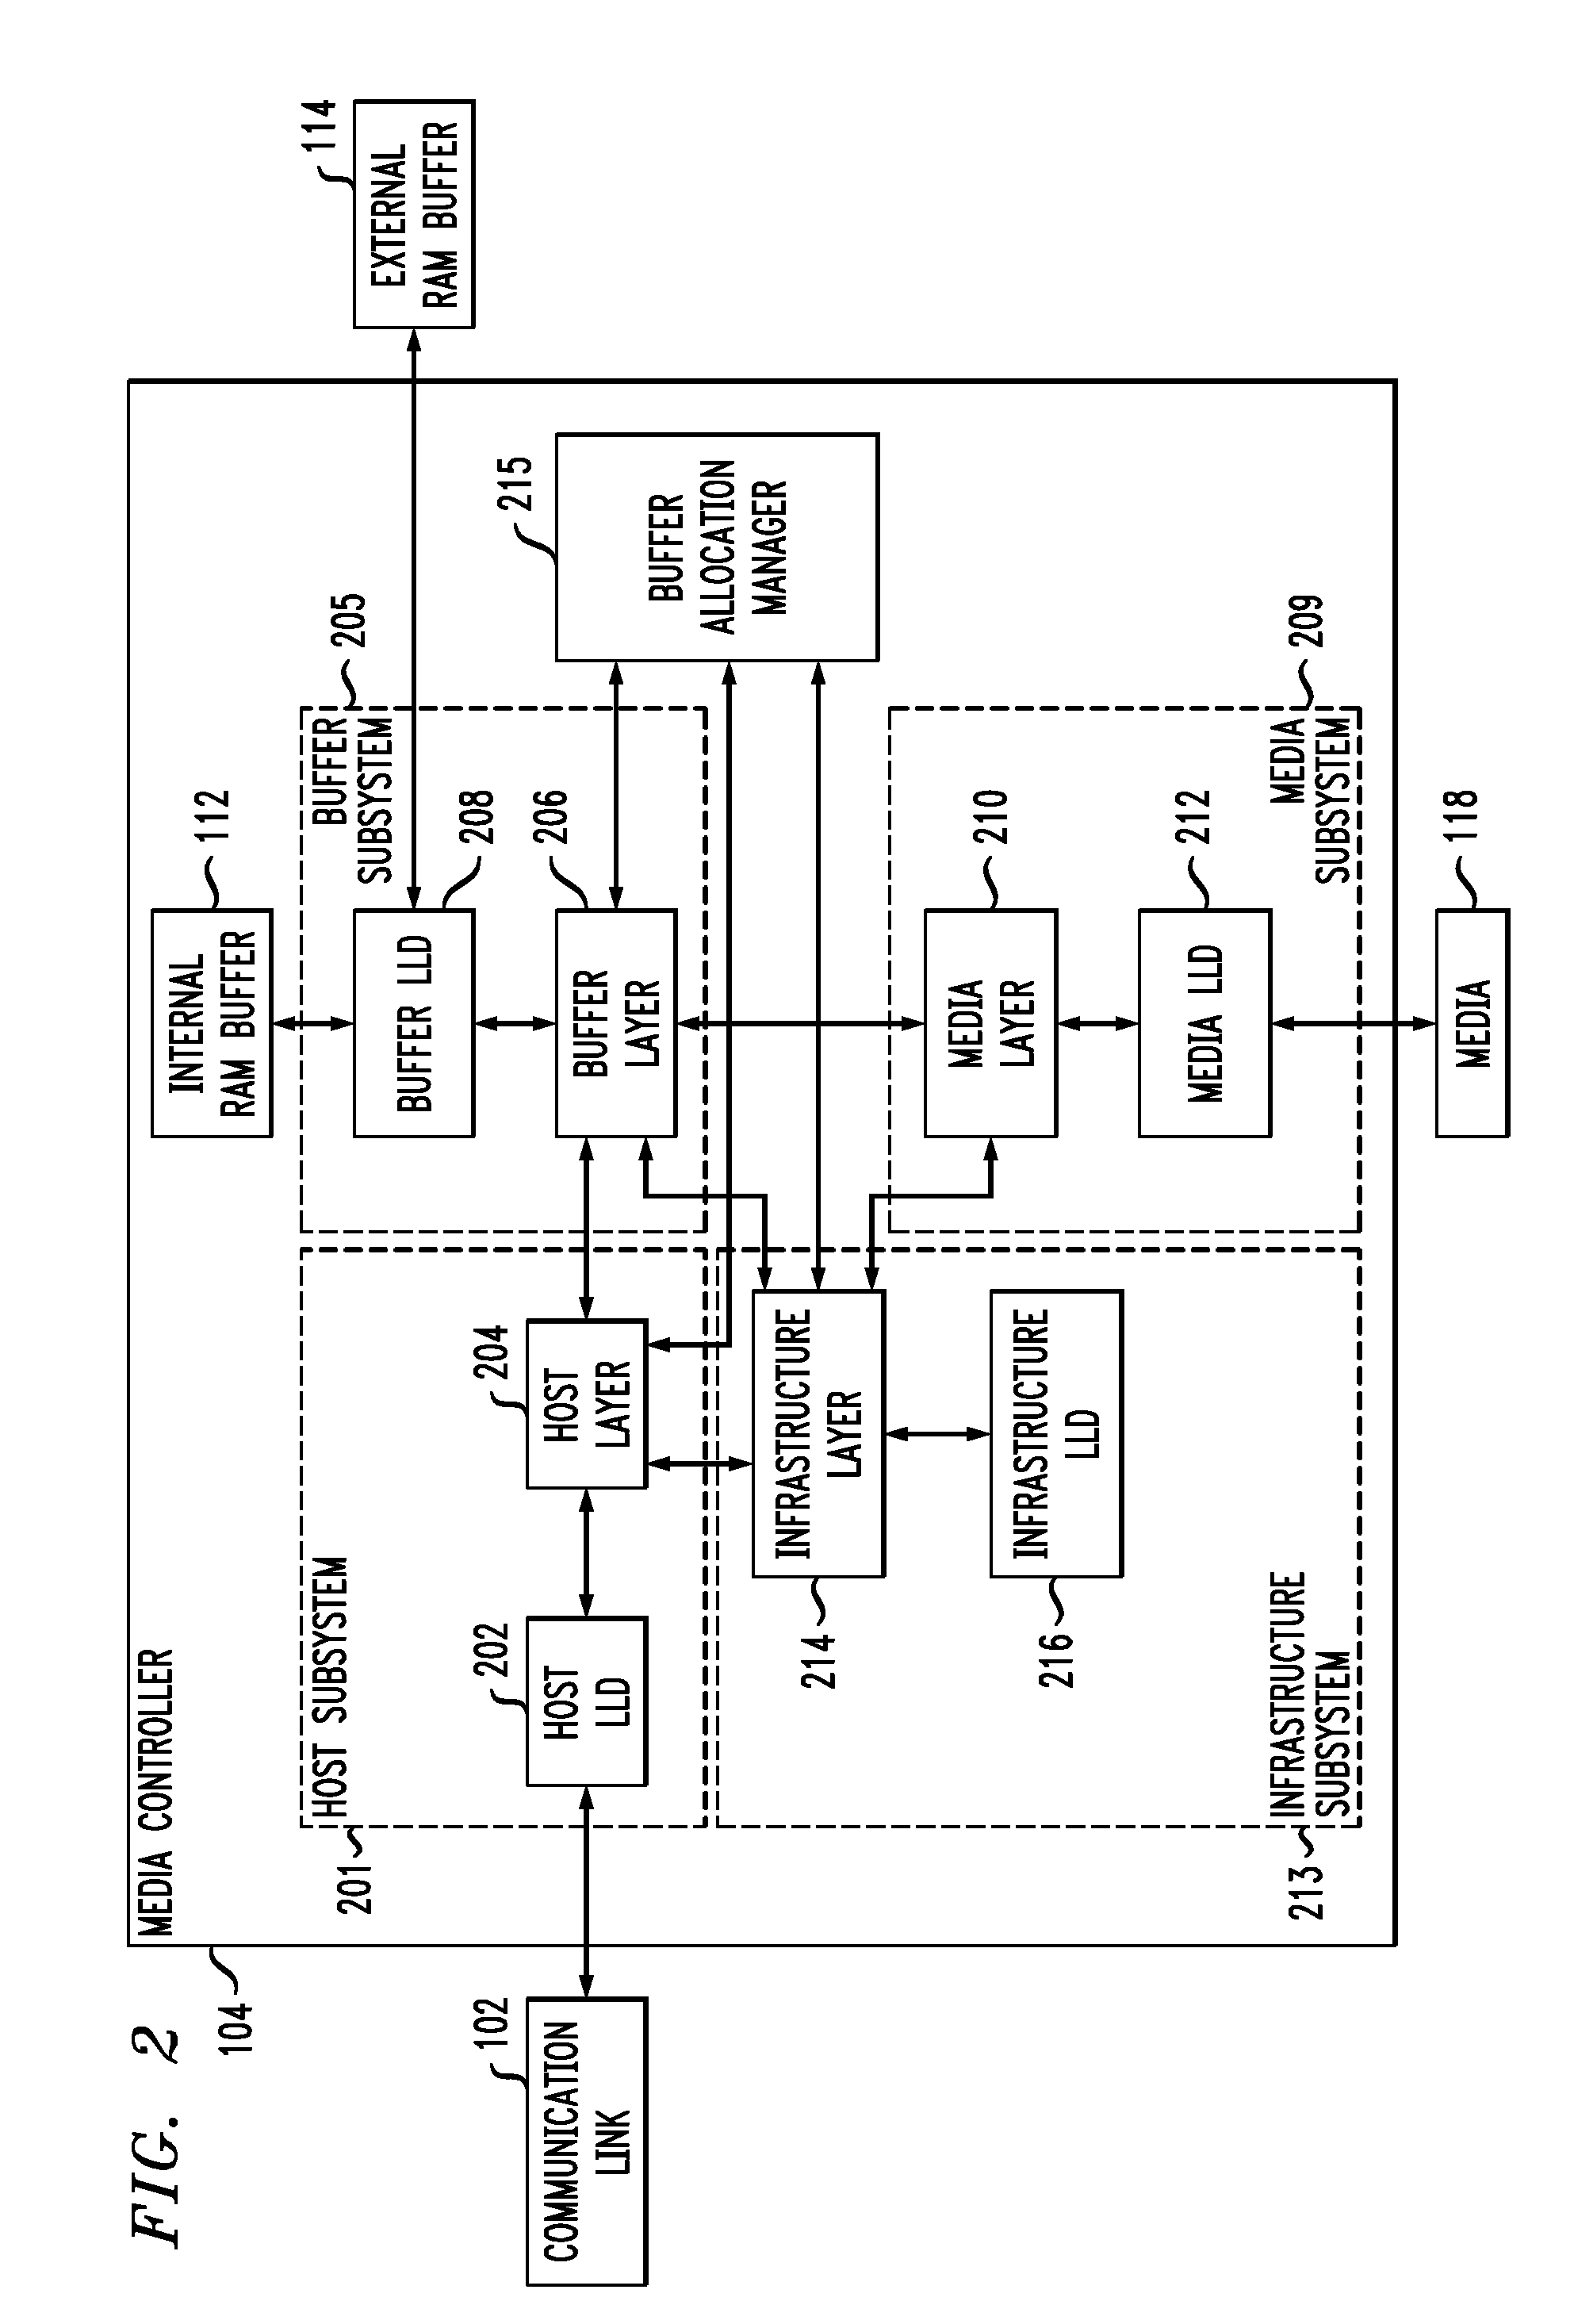 Processing Diagnostic Requests for Direct Block Access Storage Devices